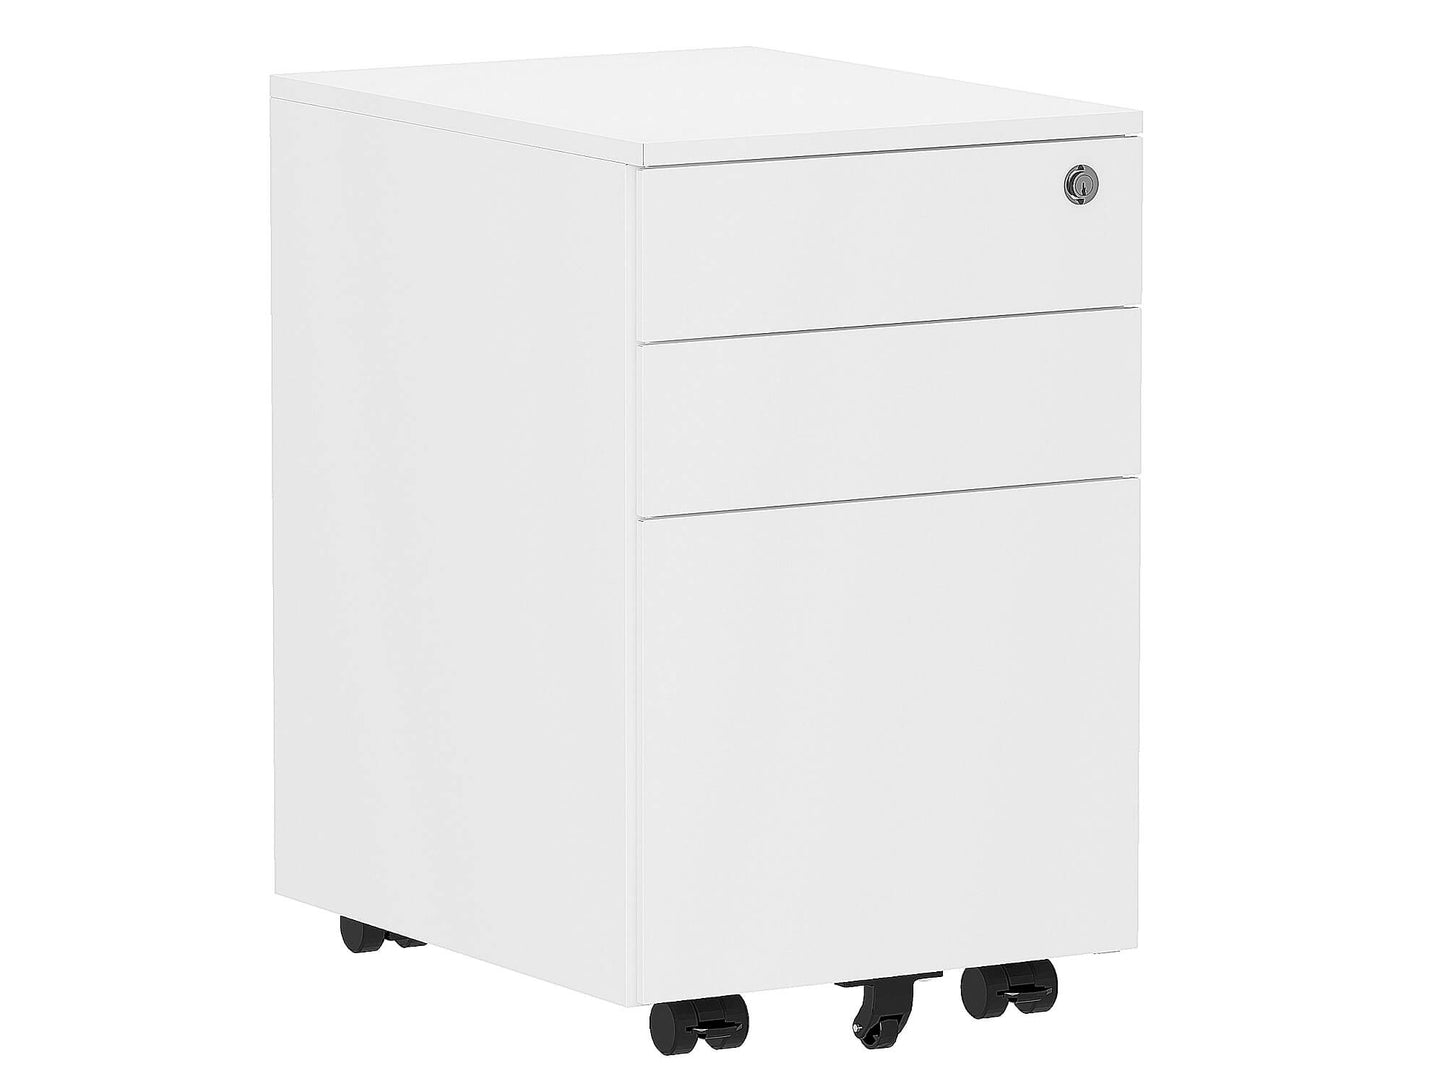 BBF File Cabinets 3-Drawer Steel with Lock Black/White